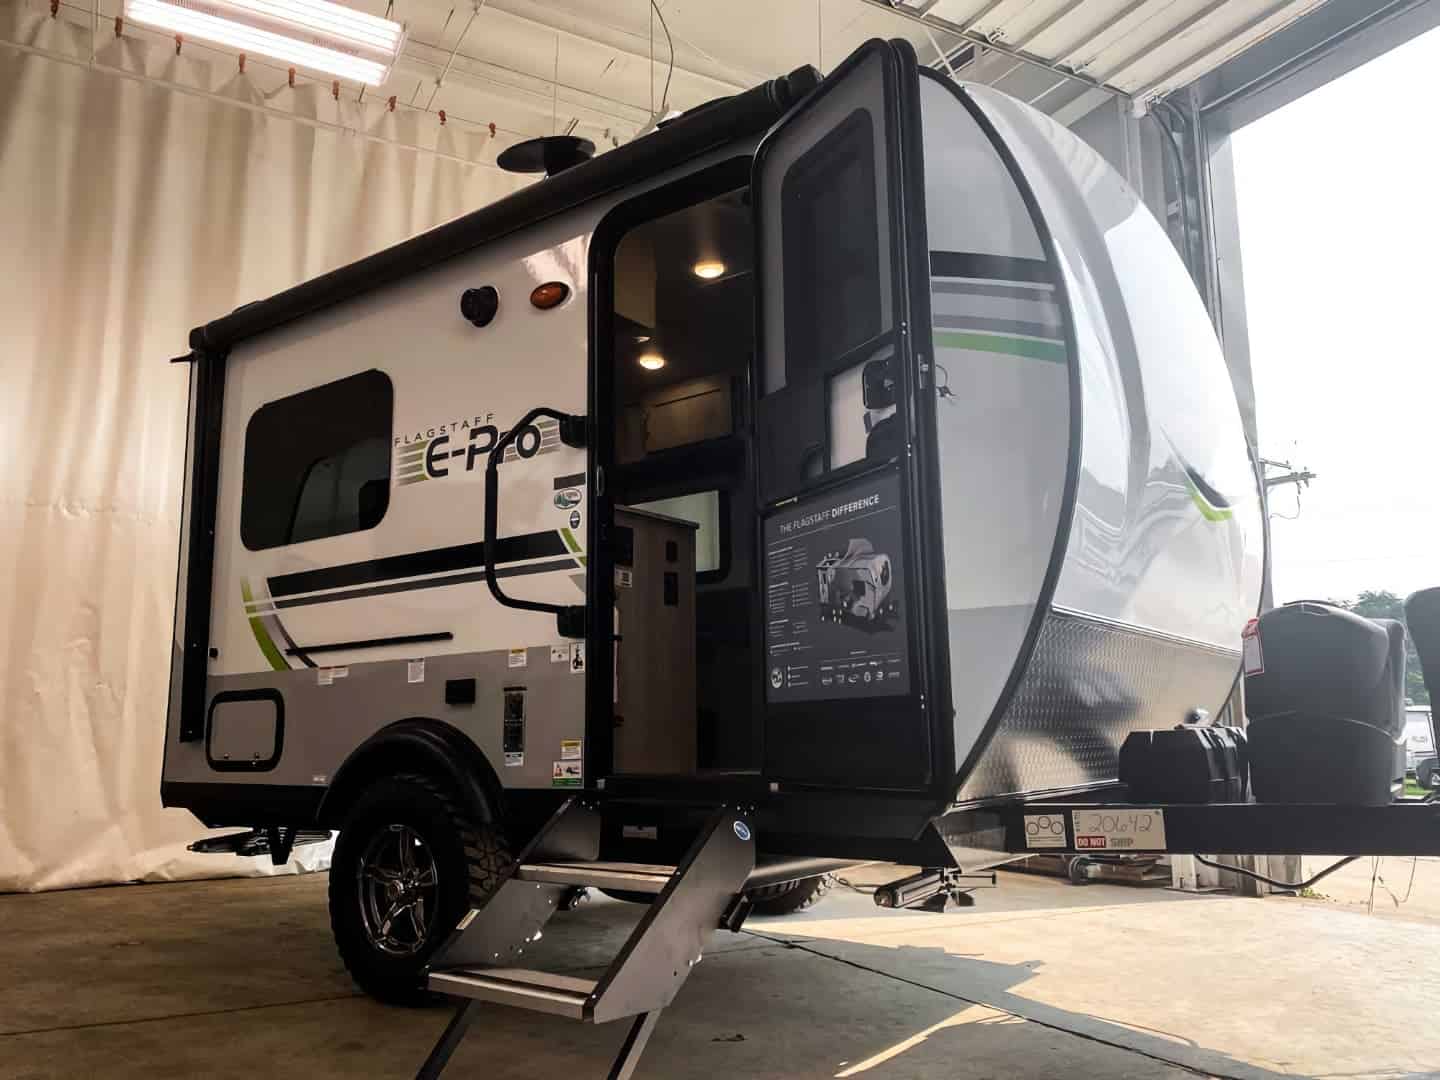 30 Small Campers With Bathrooms: Bring A Toilet With Camp Addict